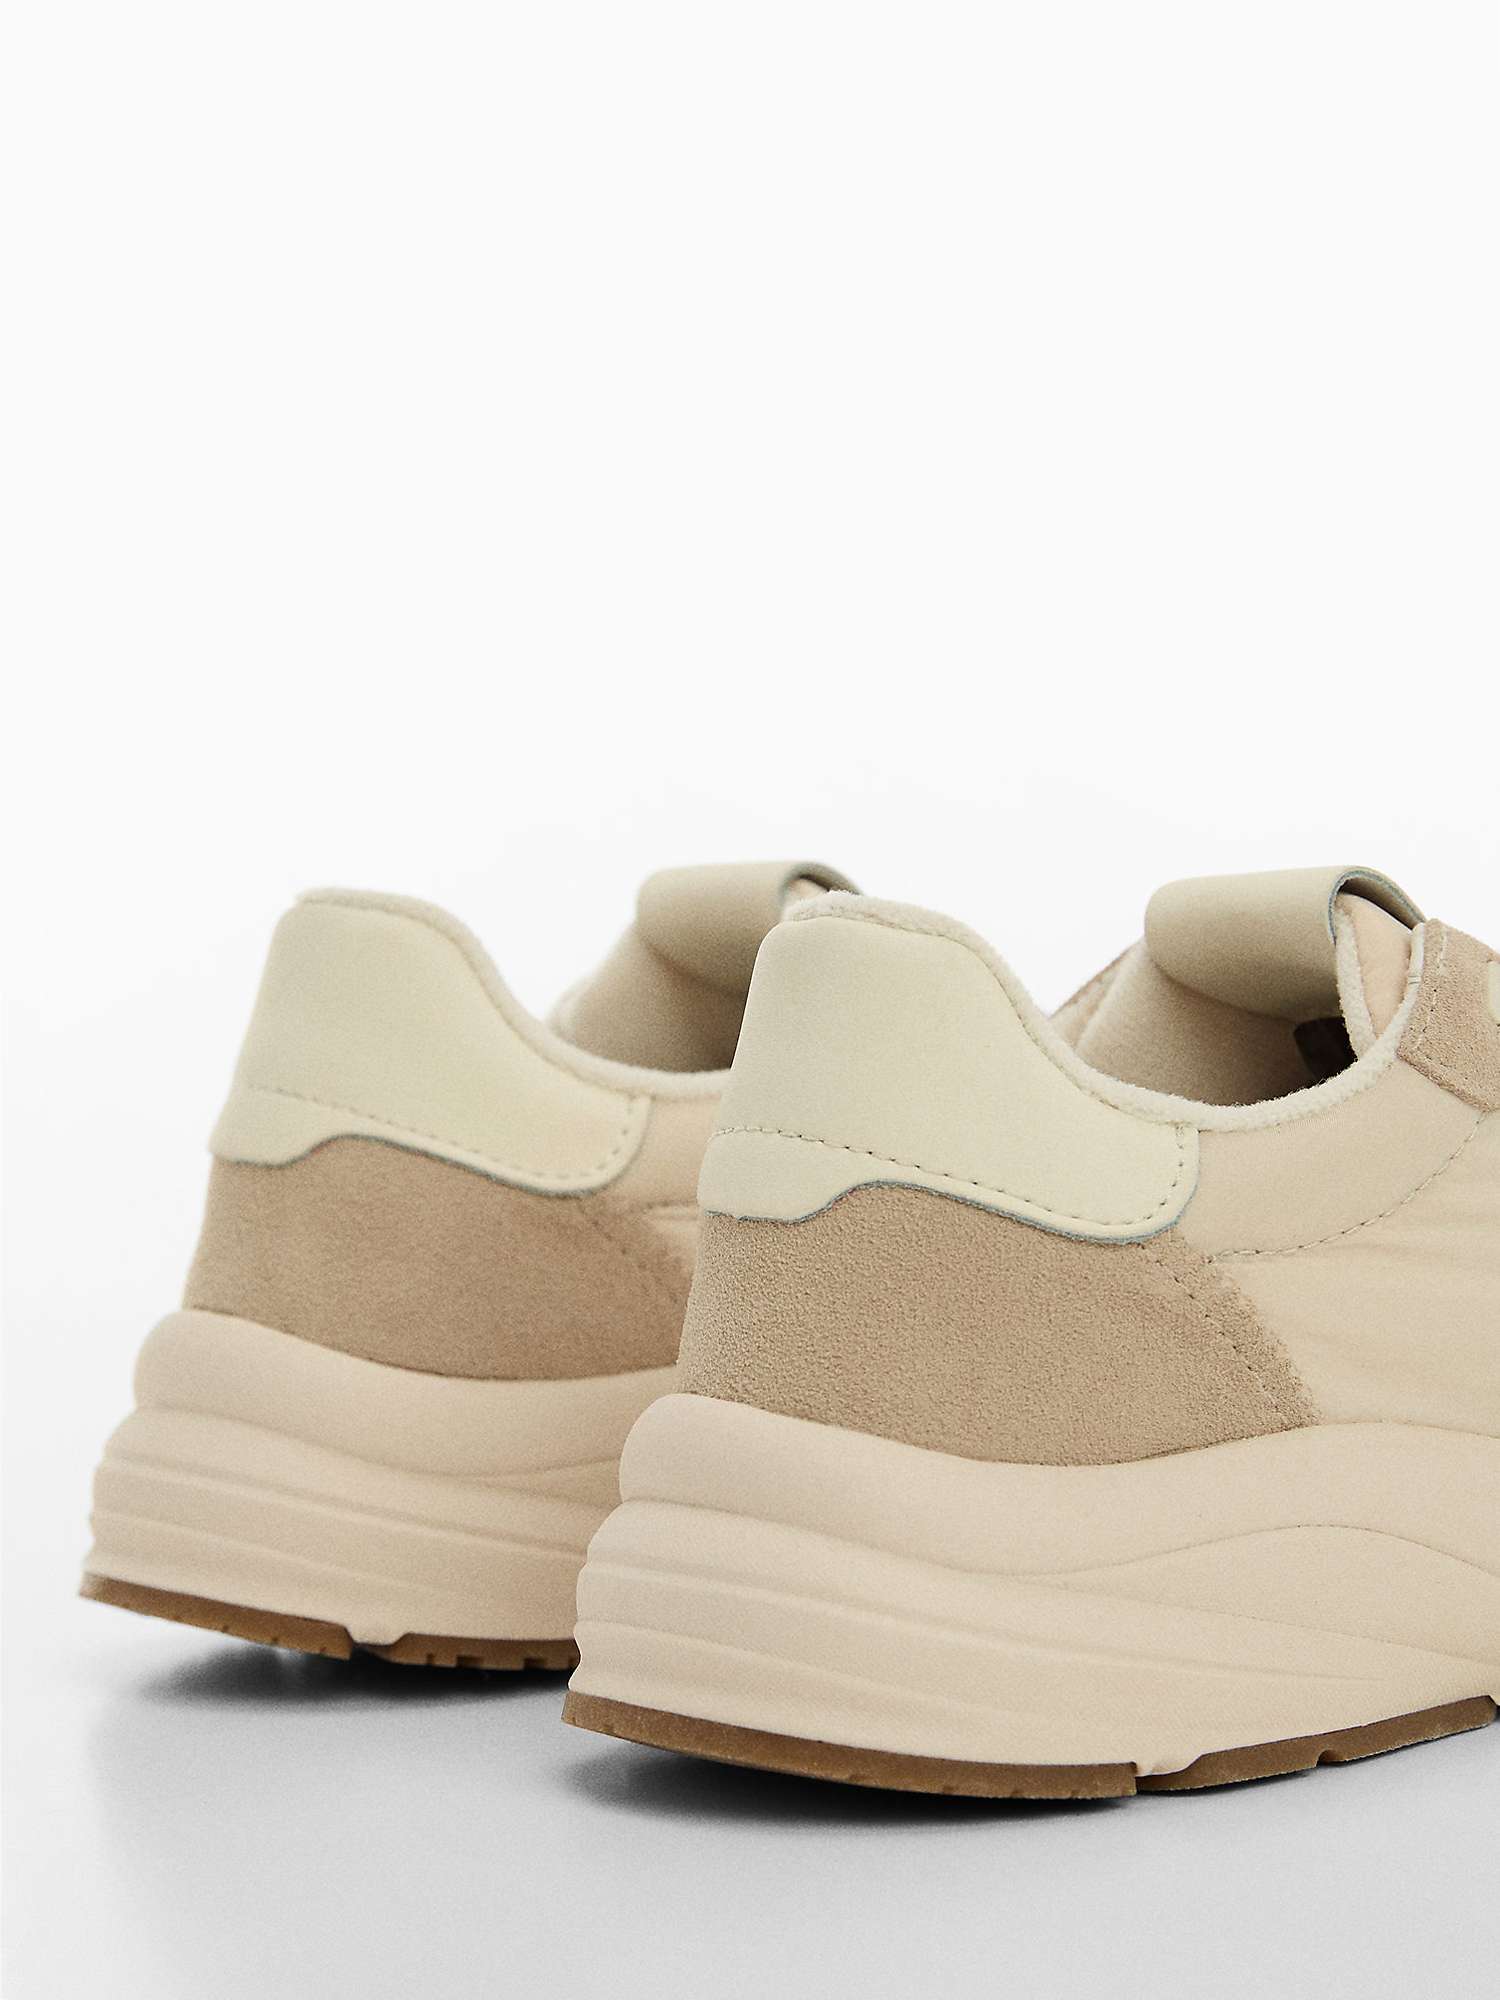 Buy Mango Rope Leather Mix Trainers, Light Beige Online at johnlewis.com